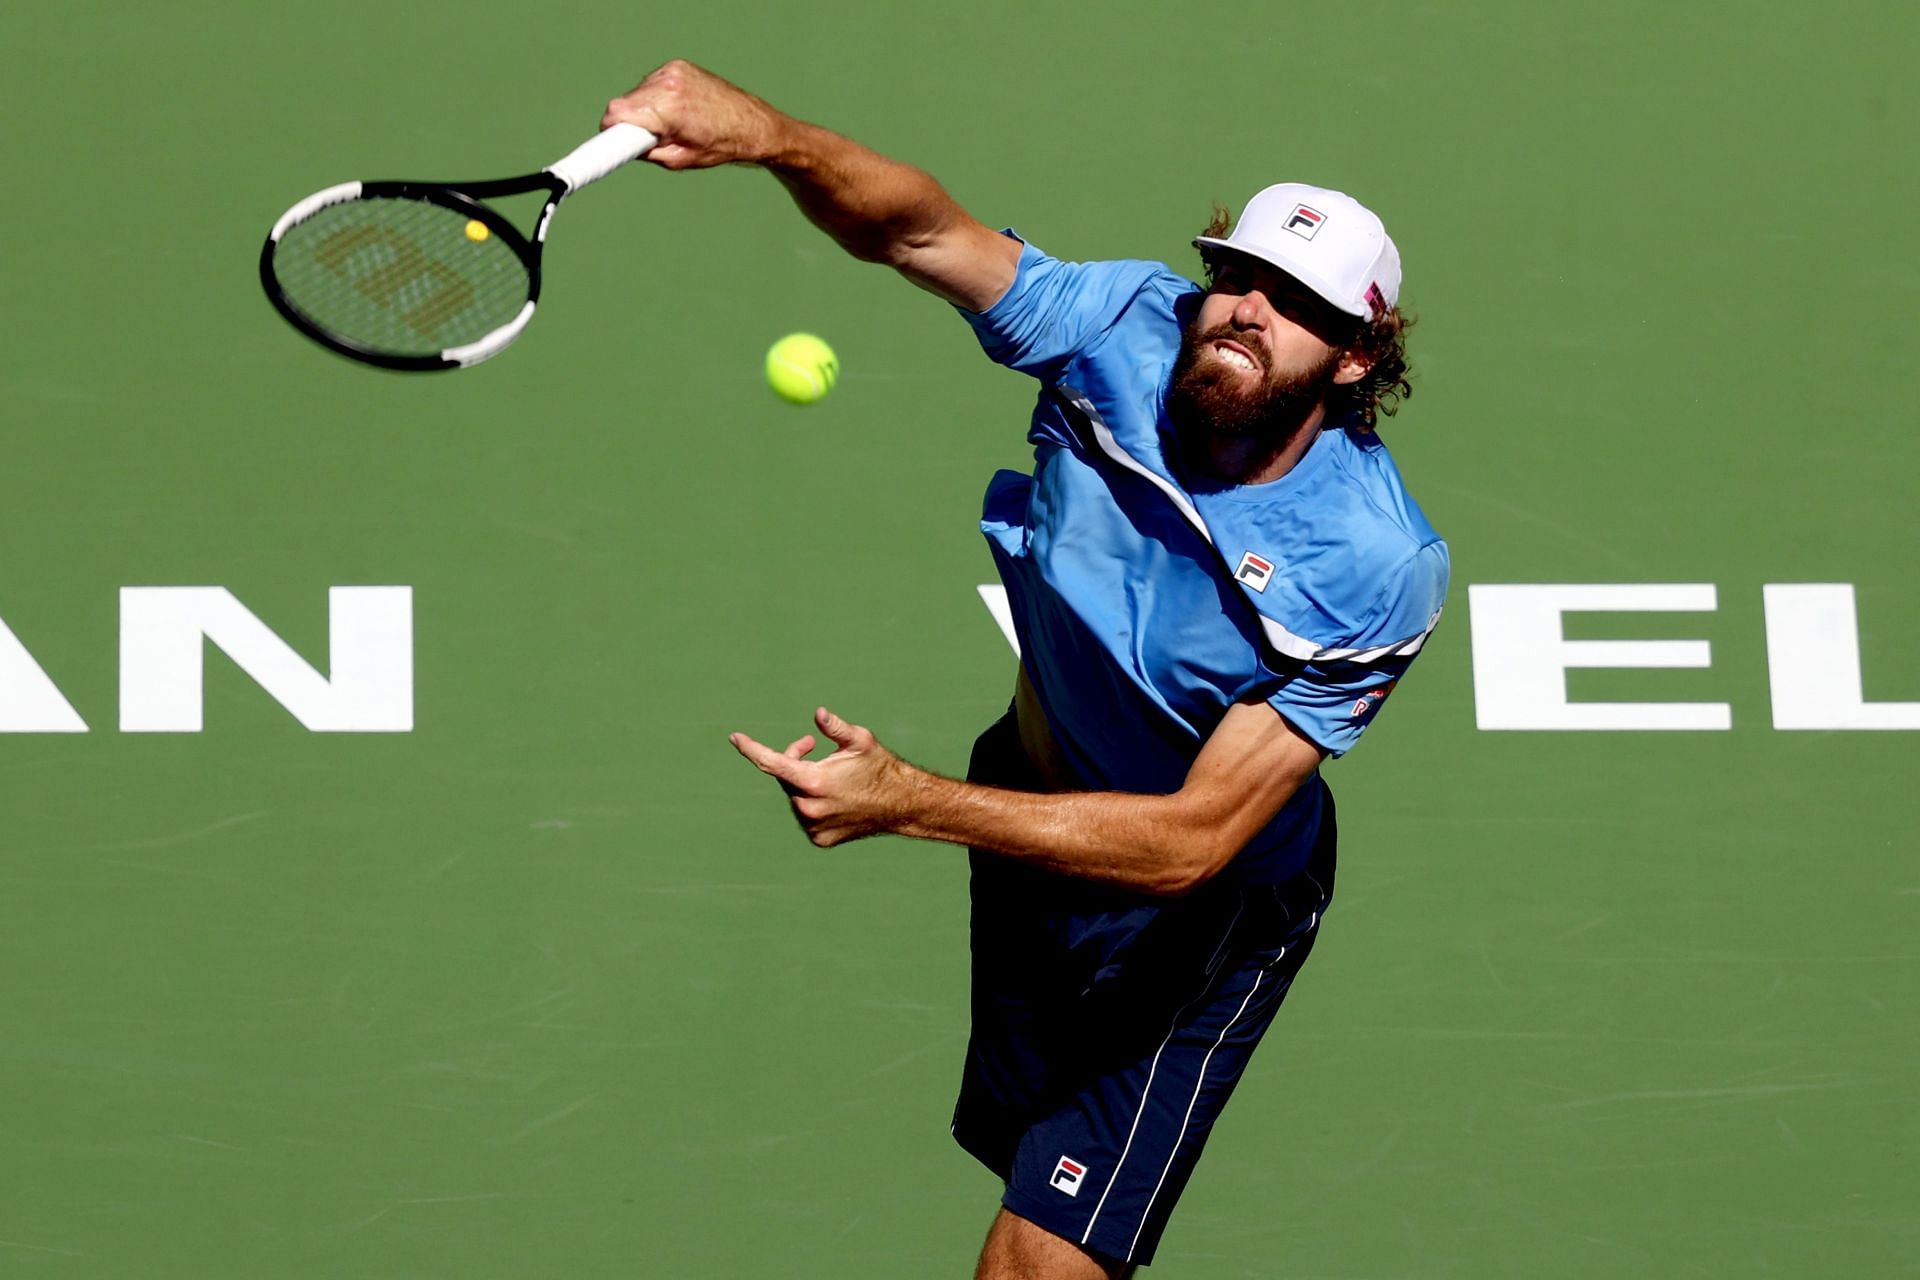 Reilly Opelka in action at the BNP Paribas Open